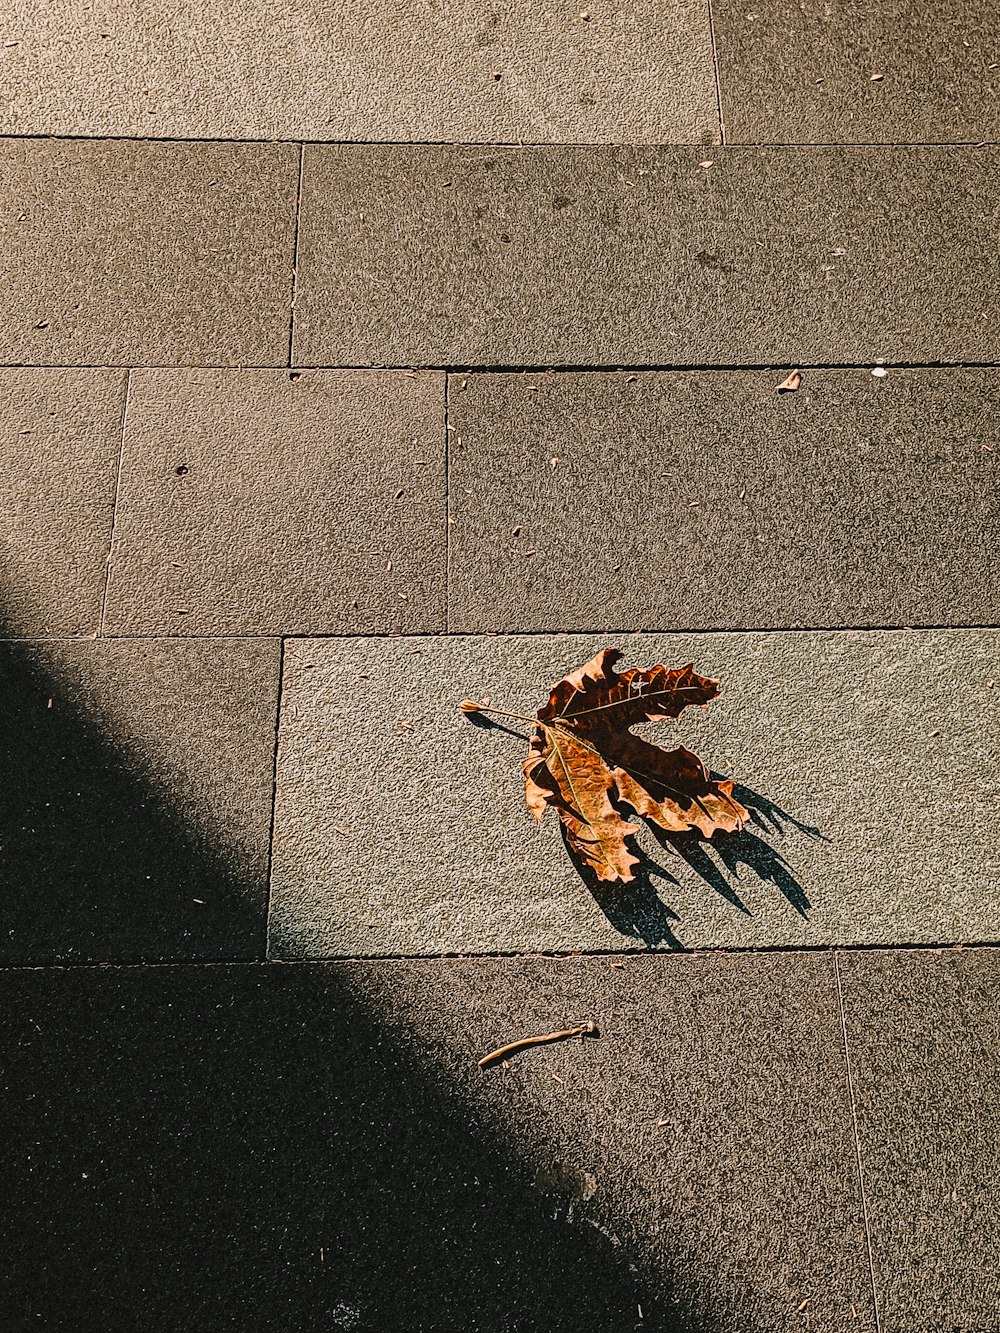 a leaf laying on the ground next to a fire hydrant